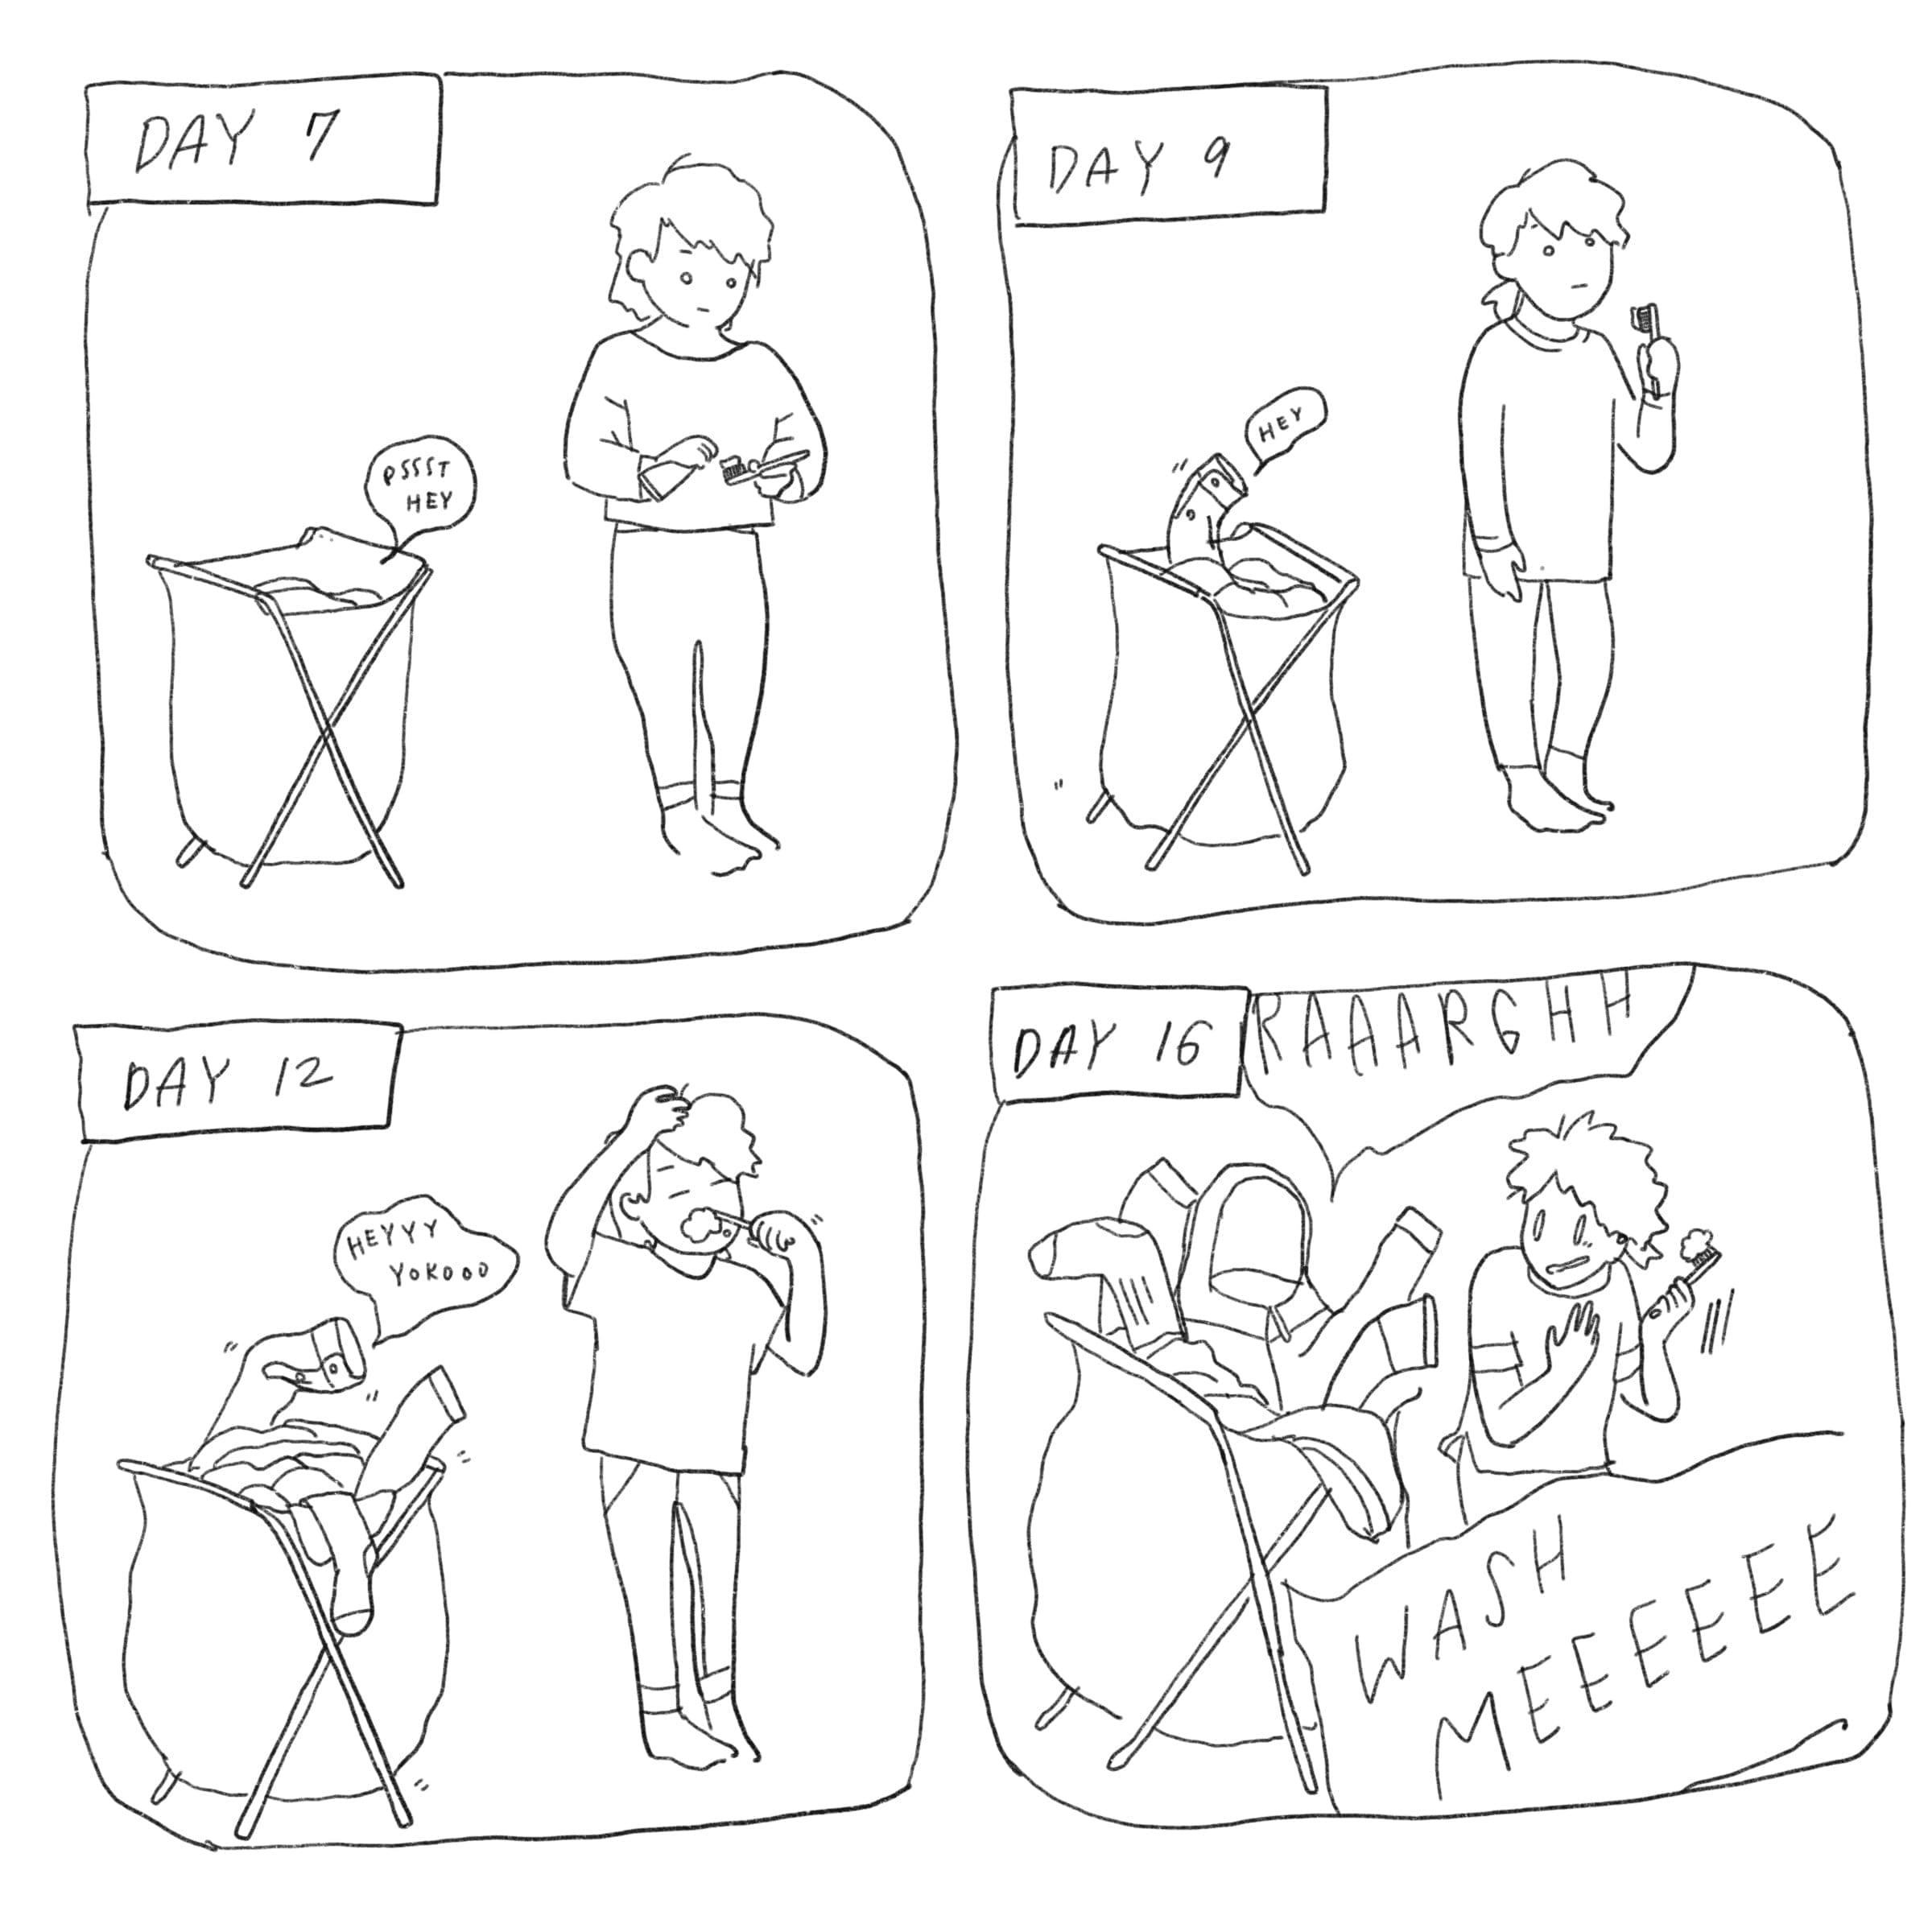 A comic about how I neglect my laundry until it’s basically a clothes monster